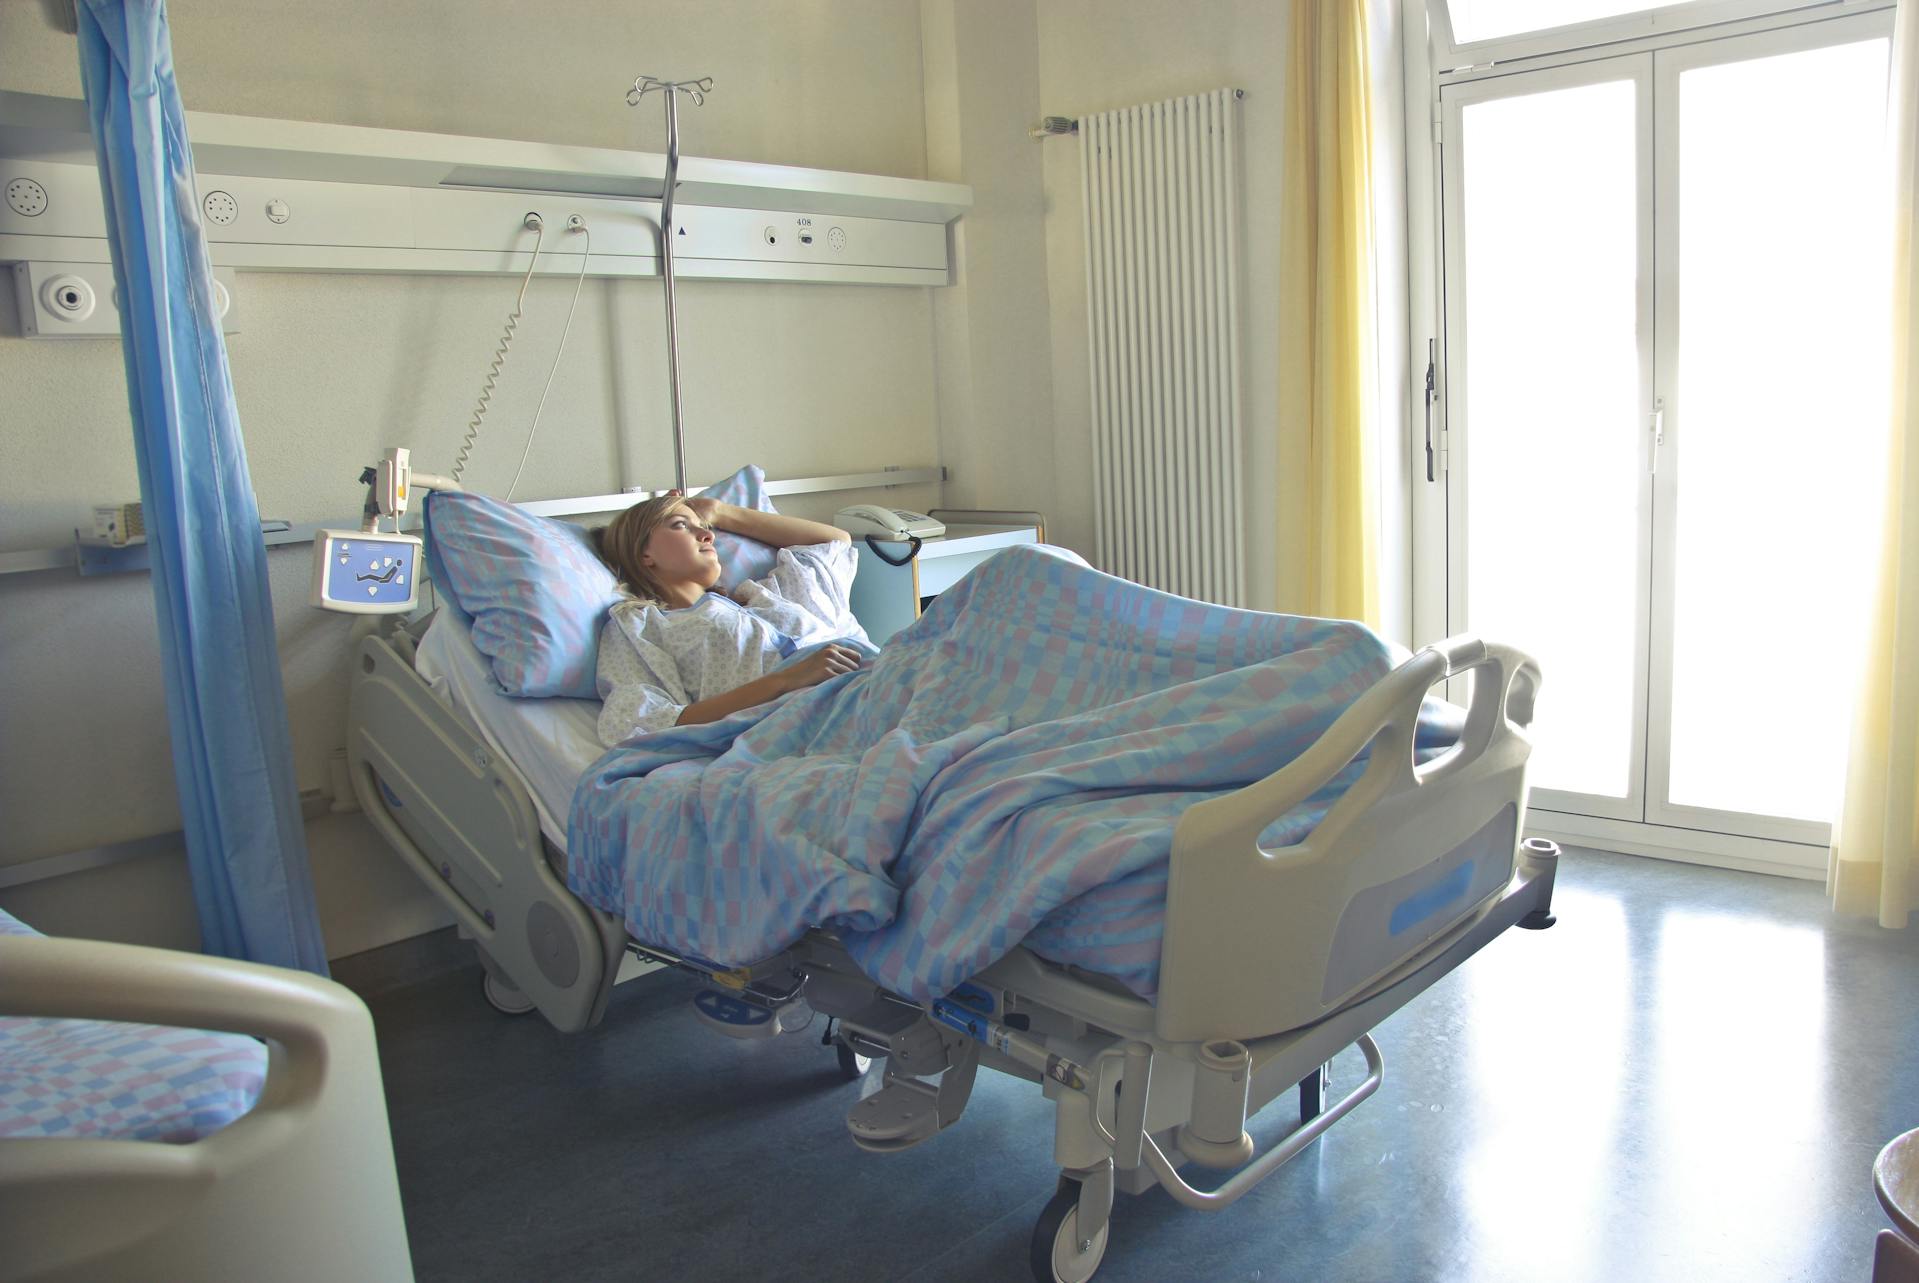 A woman lying on a hospital bed | Source: Pexels